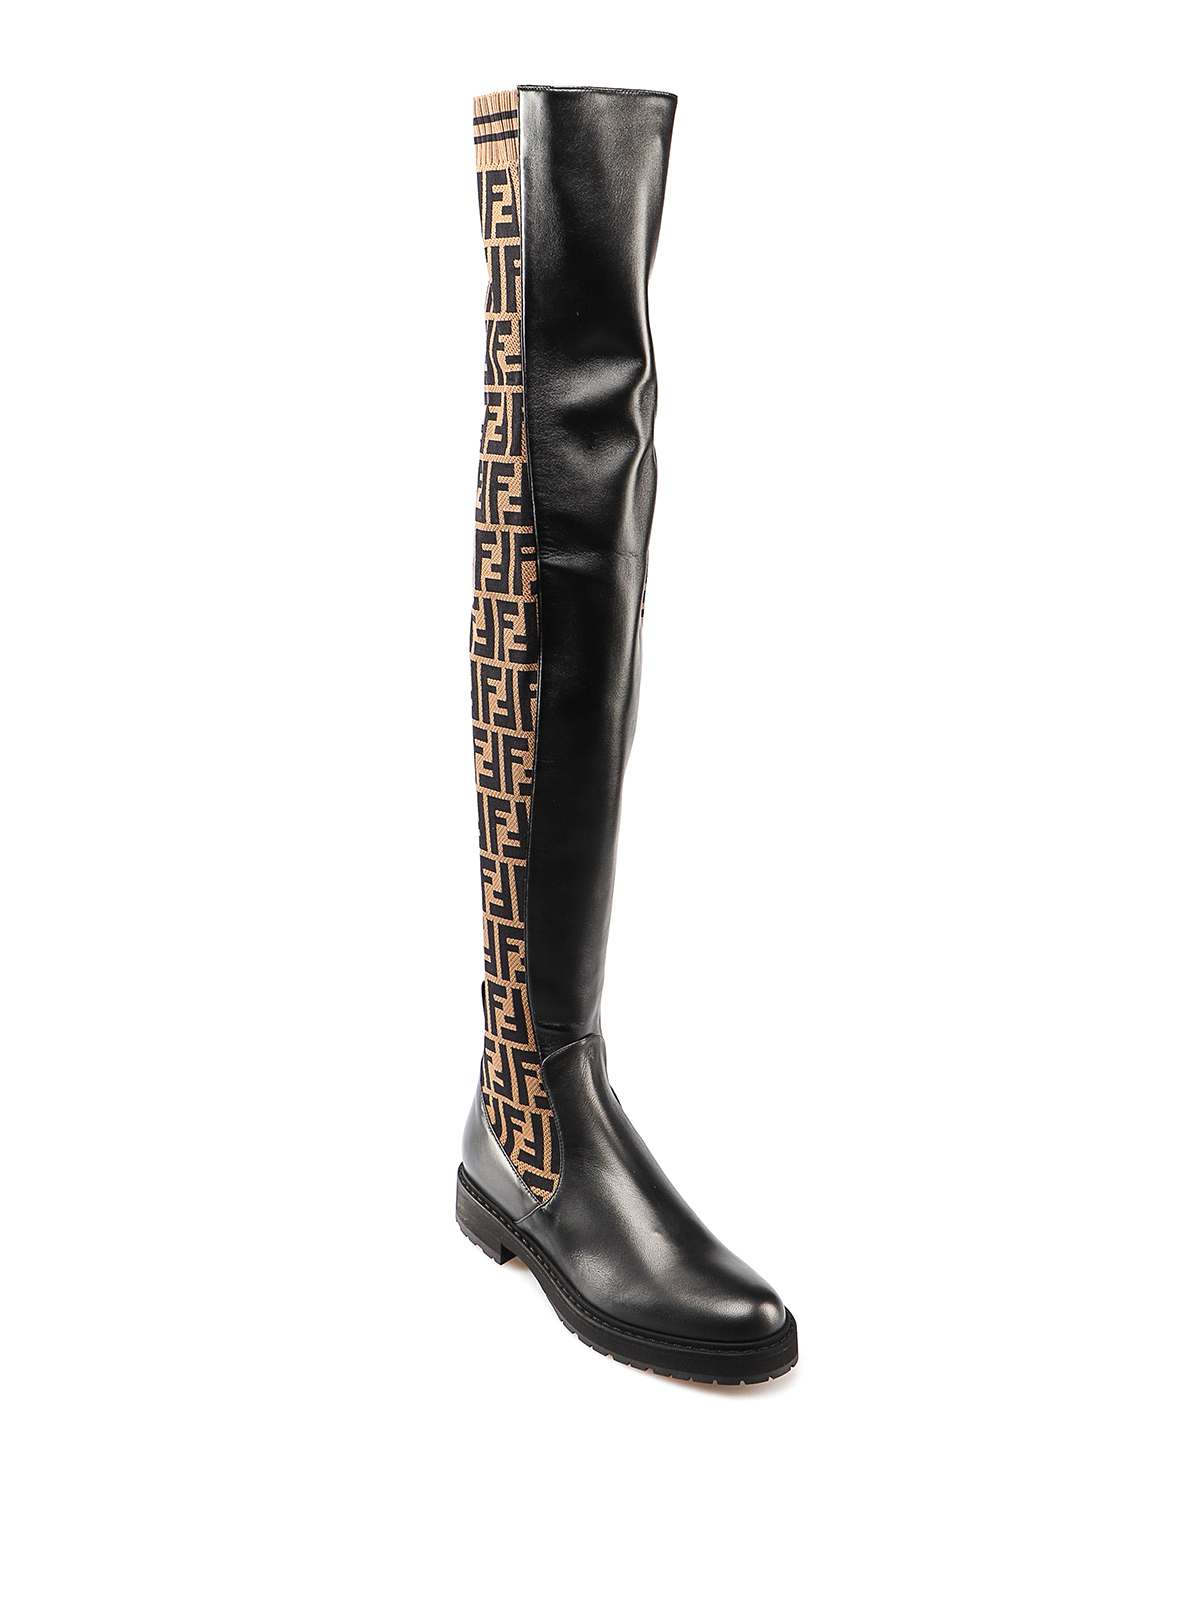 fendi boots over the knee